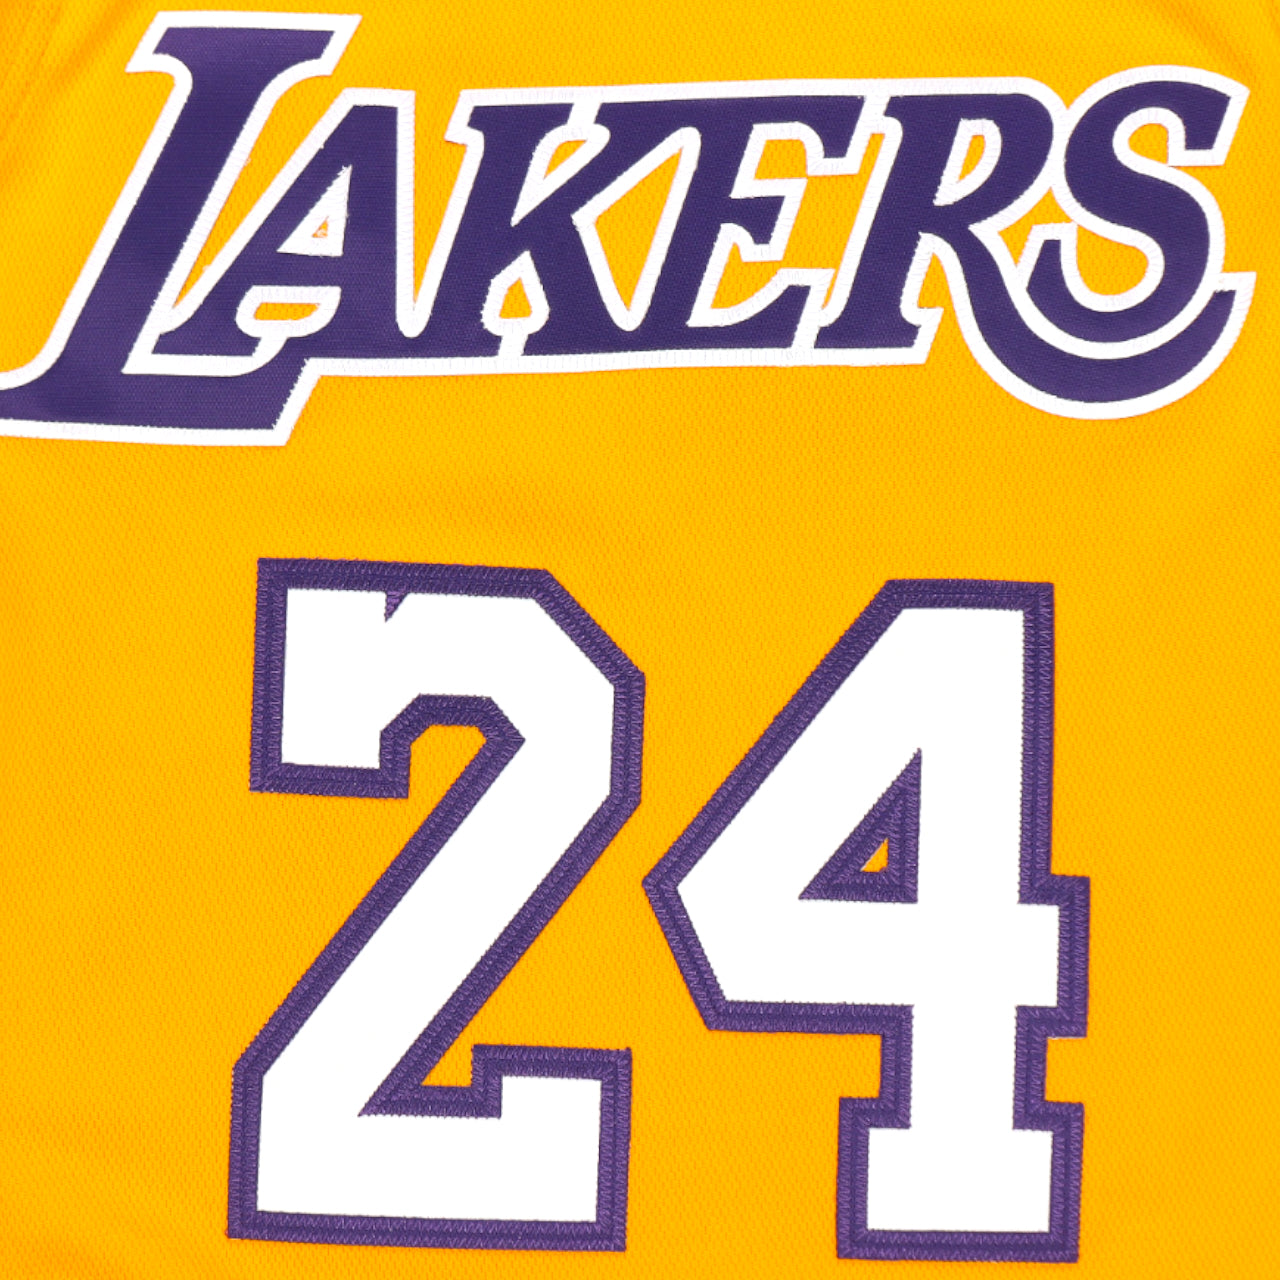 Mitchell and Ness Kobe Bryant Los Angeles Lakers 2008-2009 Home Authentic Jersey - Yellow #24 - Hoop Jersey Store